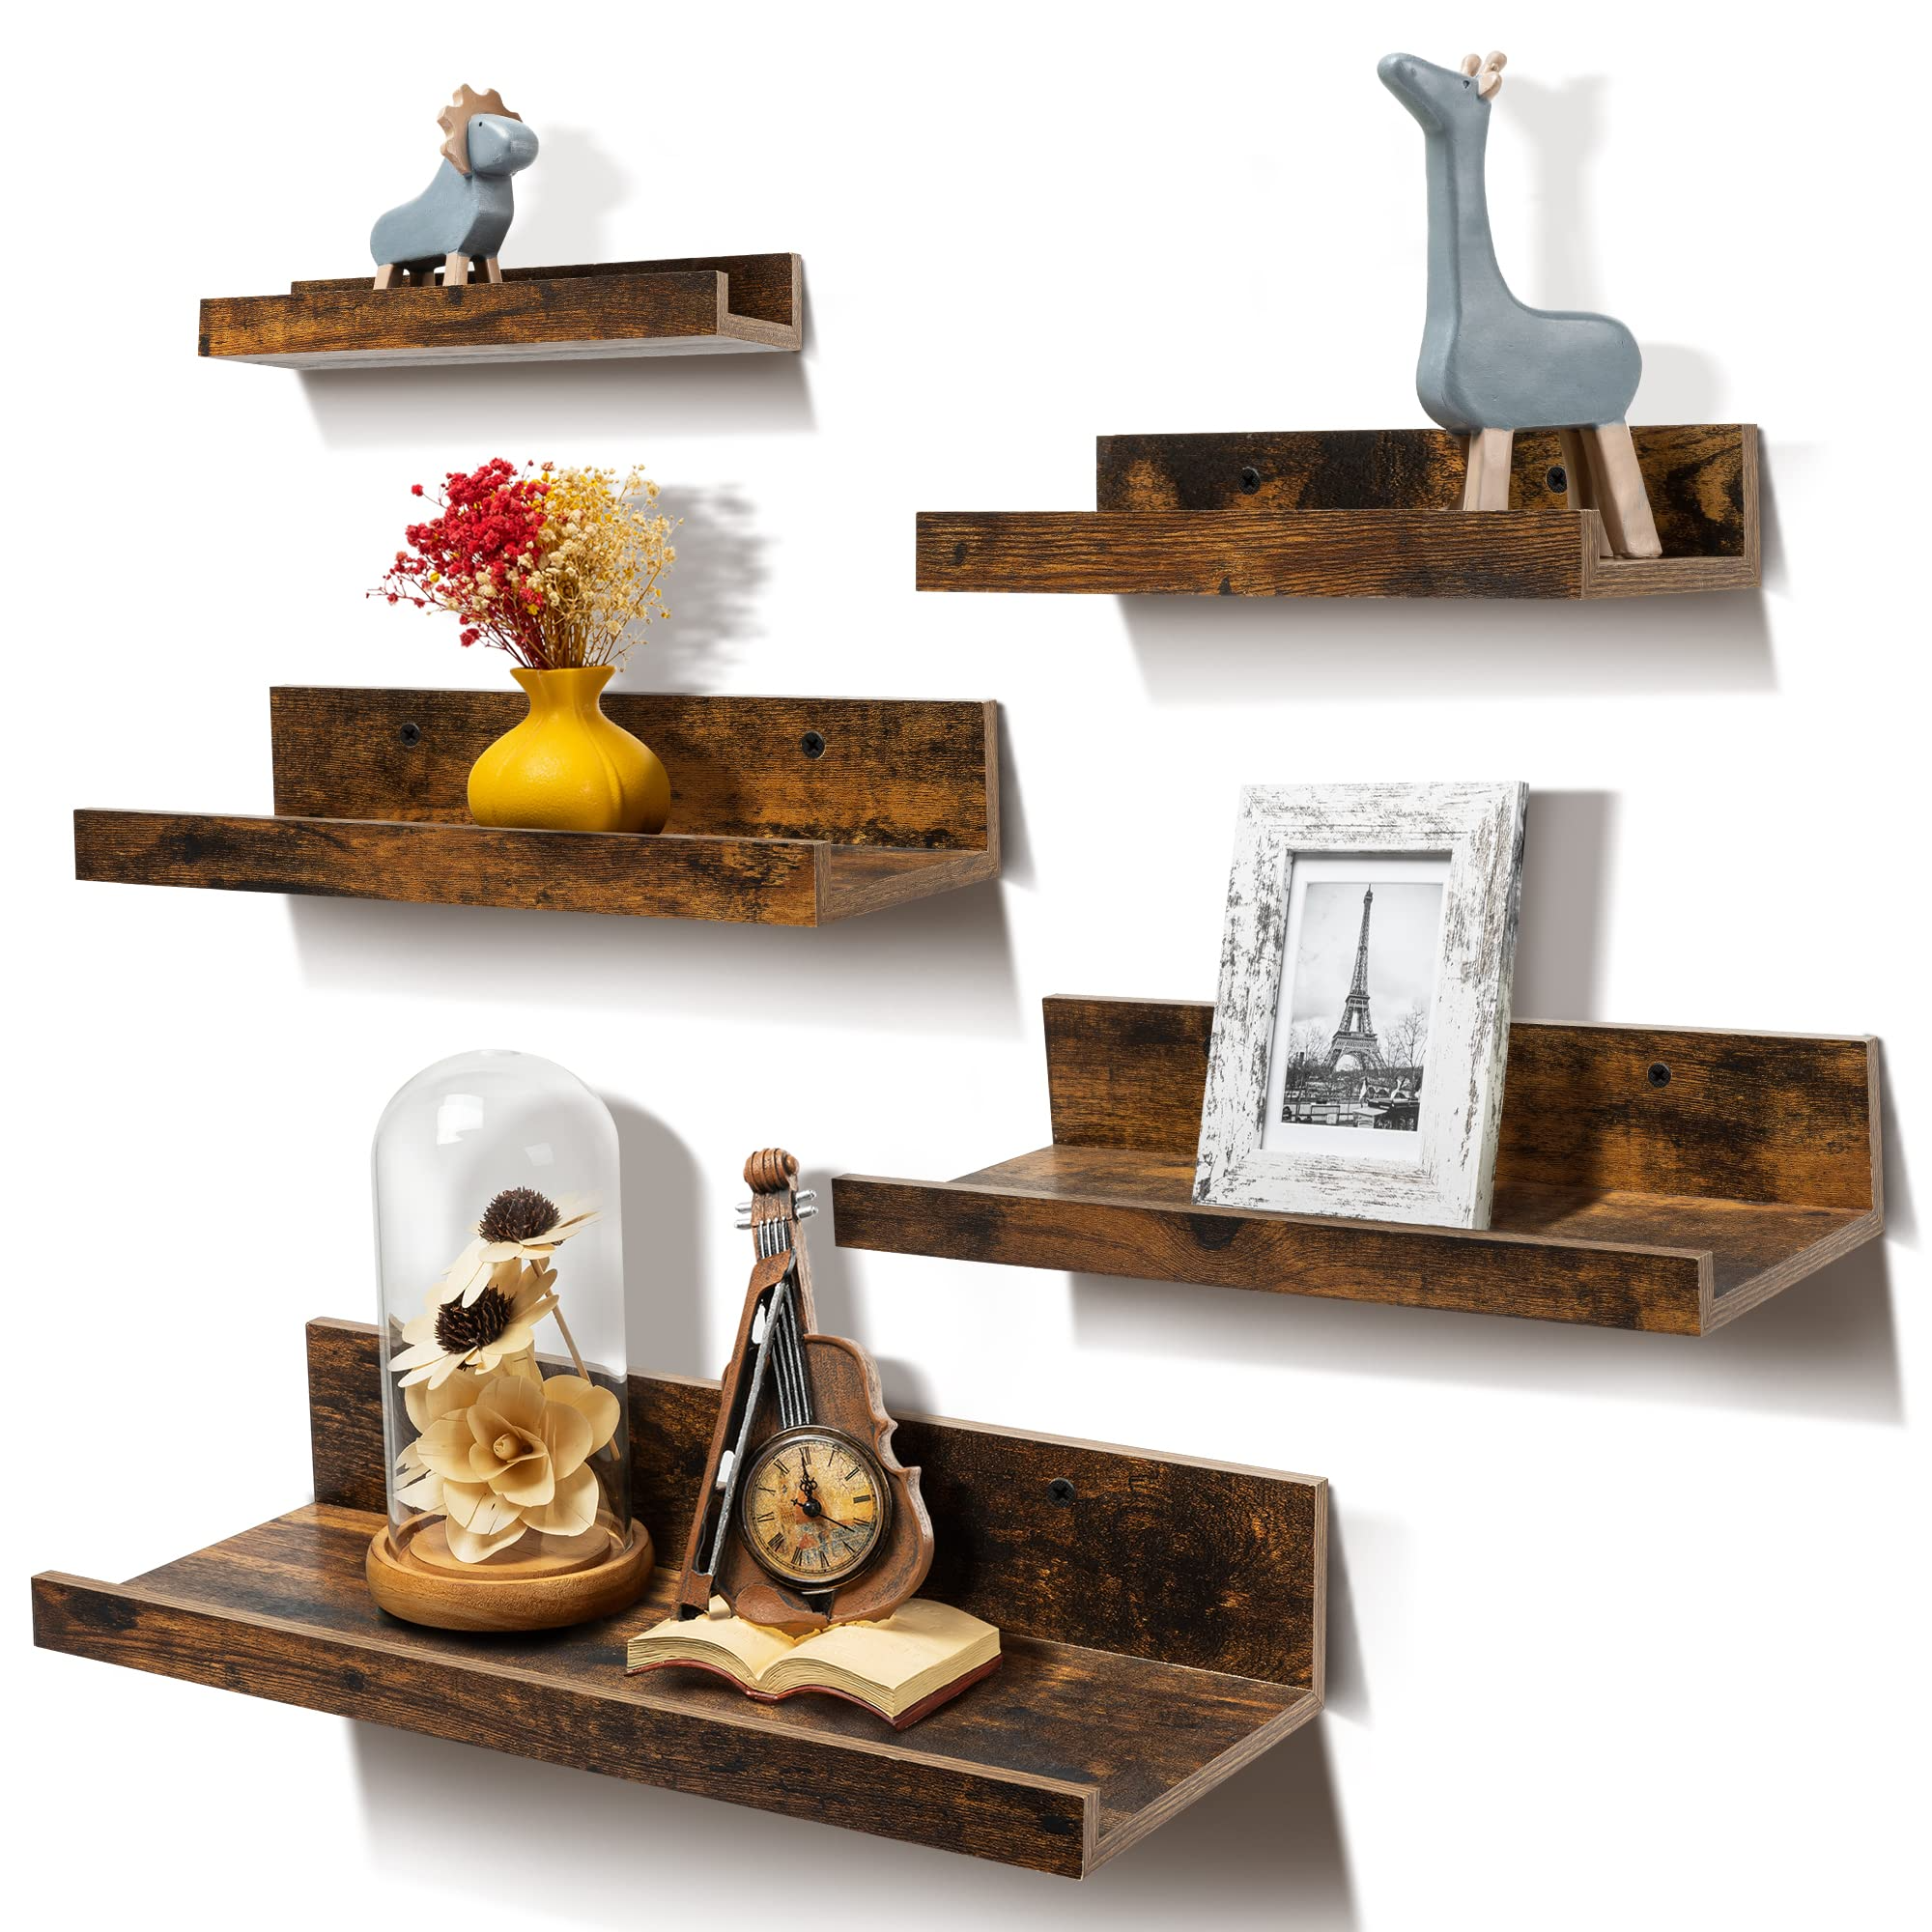 Wall Mounted Floating Shelves With Metal Frame, Rustic Wood